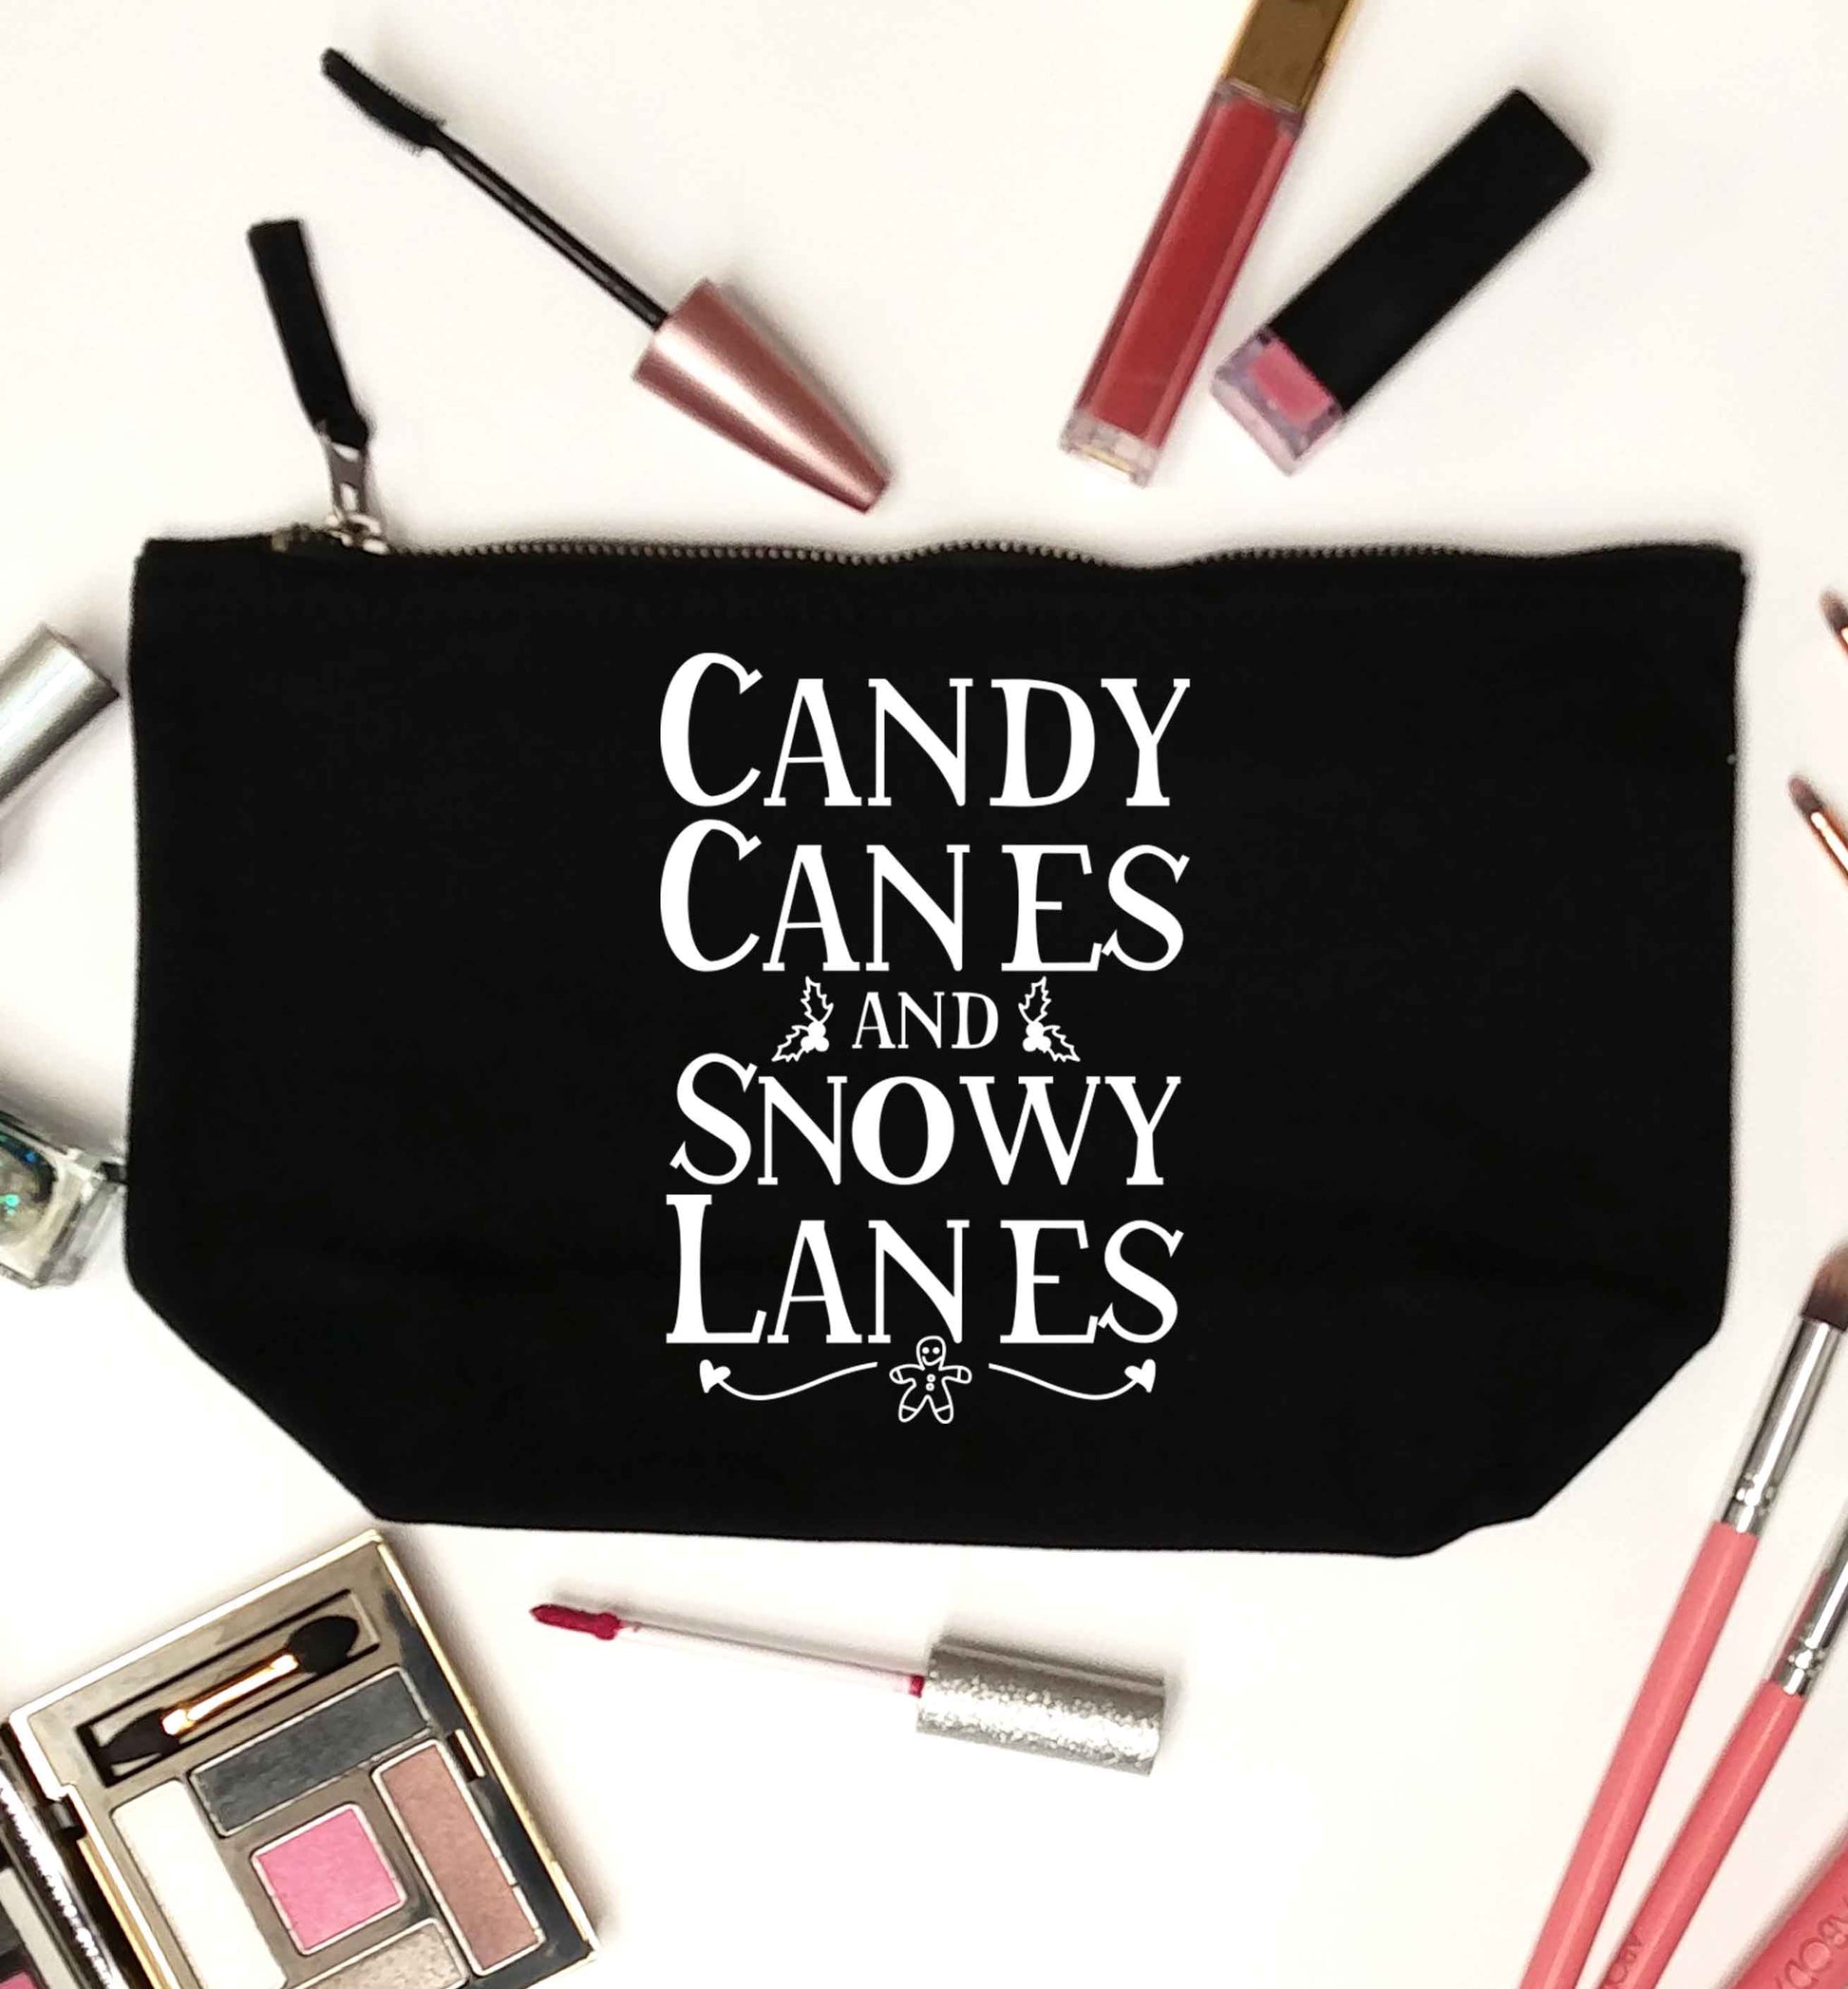 Candy canes and snowy lanes black makeup bag